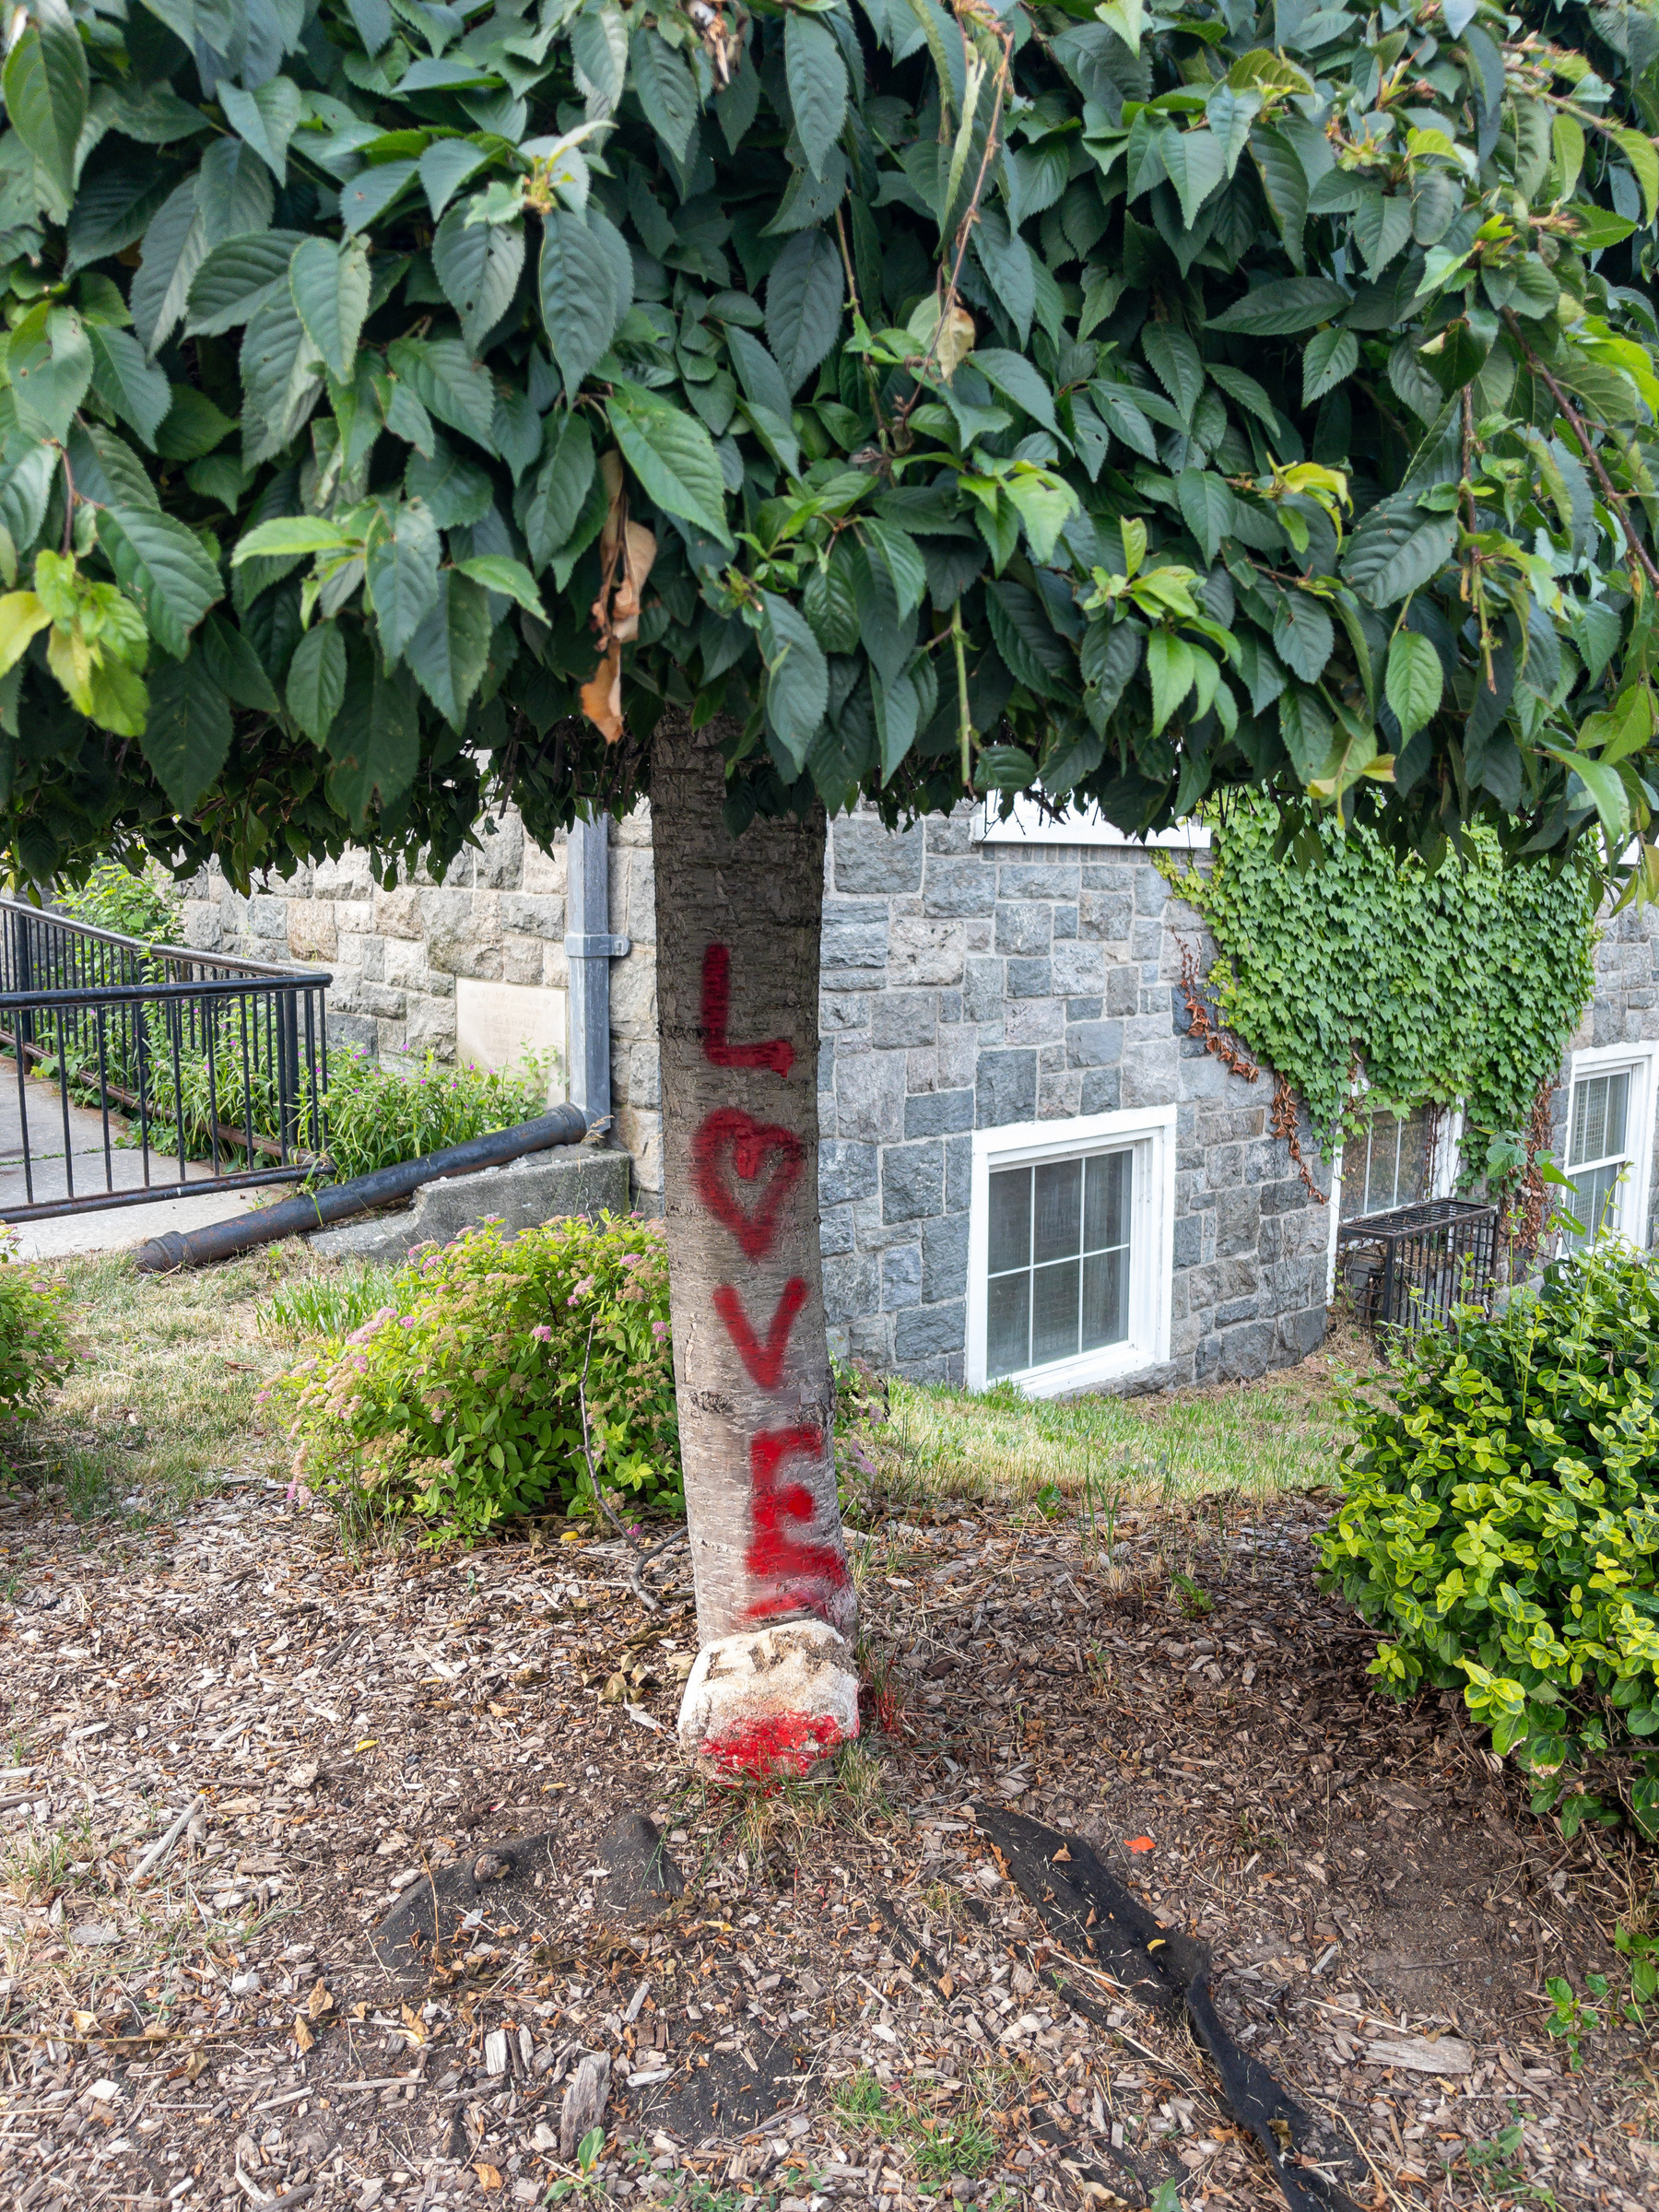 Tree with the letters L, O, V, E, painted on its trunk with red paint. The letters O is in the shape of a heart.